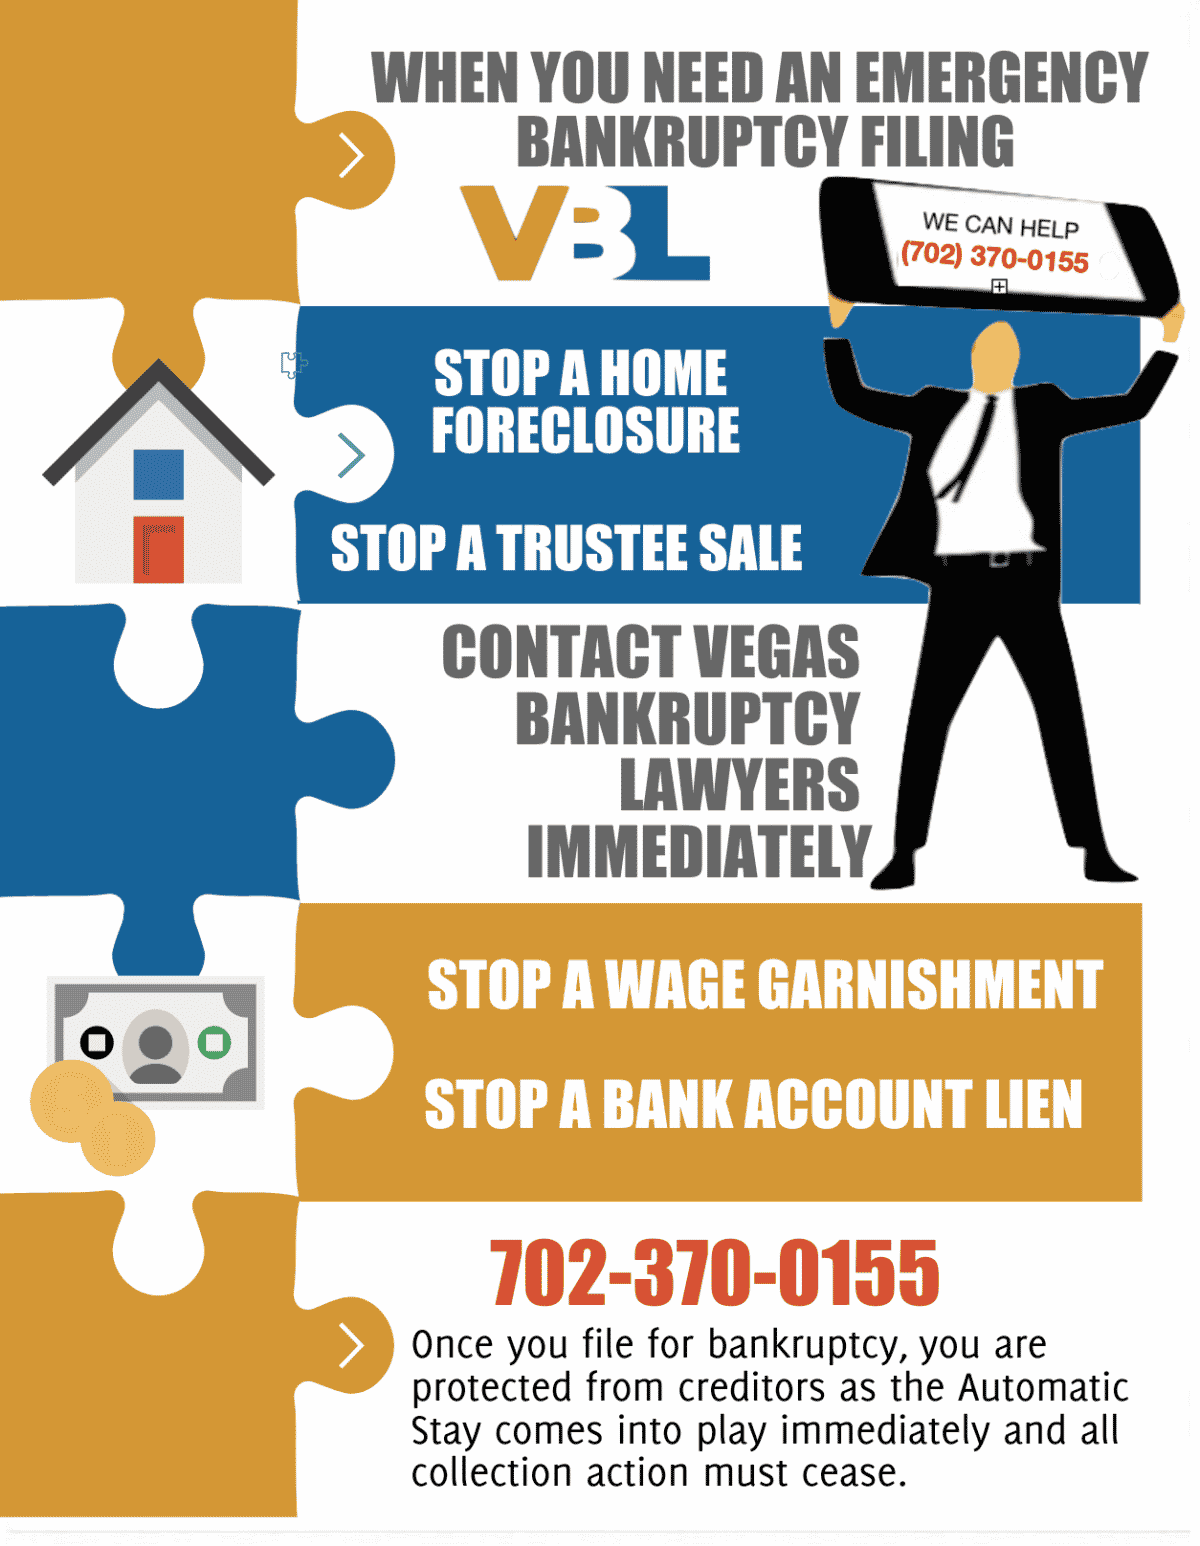 Vegas Bankruptcy Attorneys Emergency Bankruptcy Stops Foreclosure